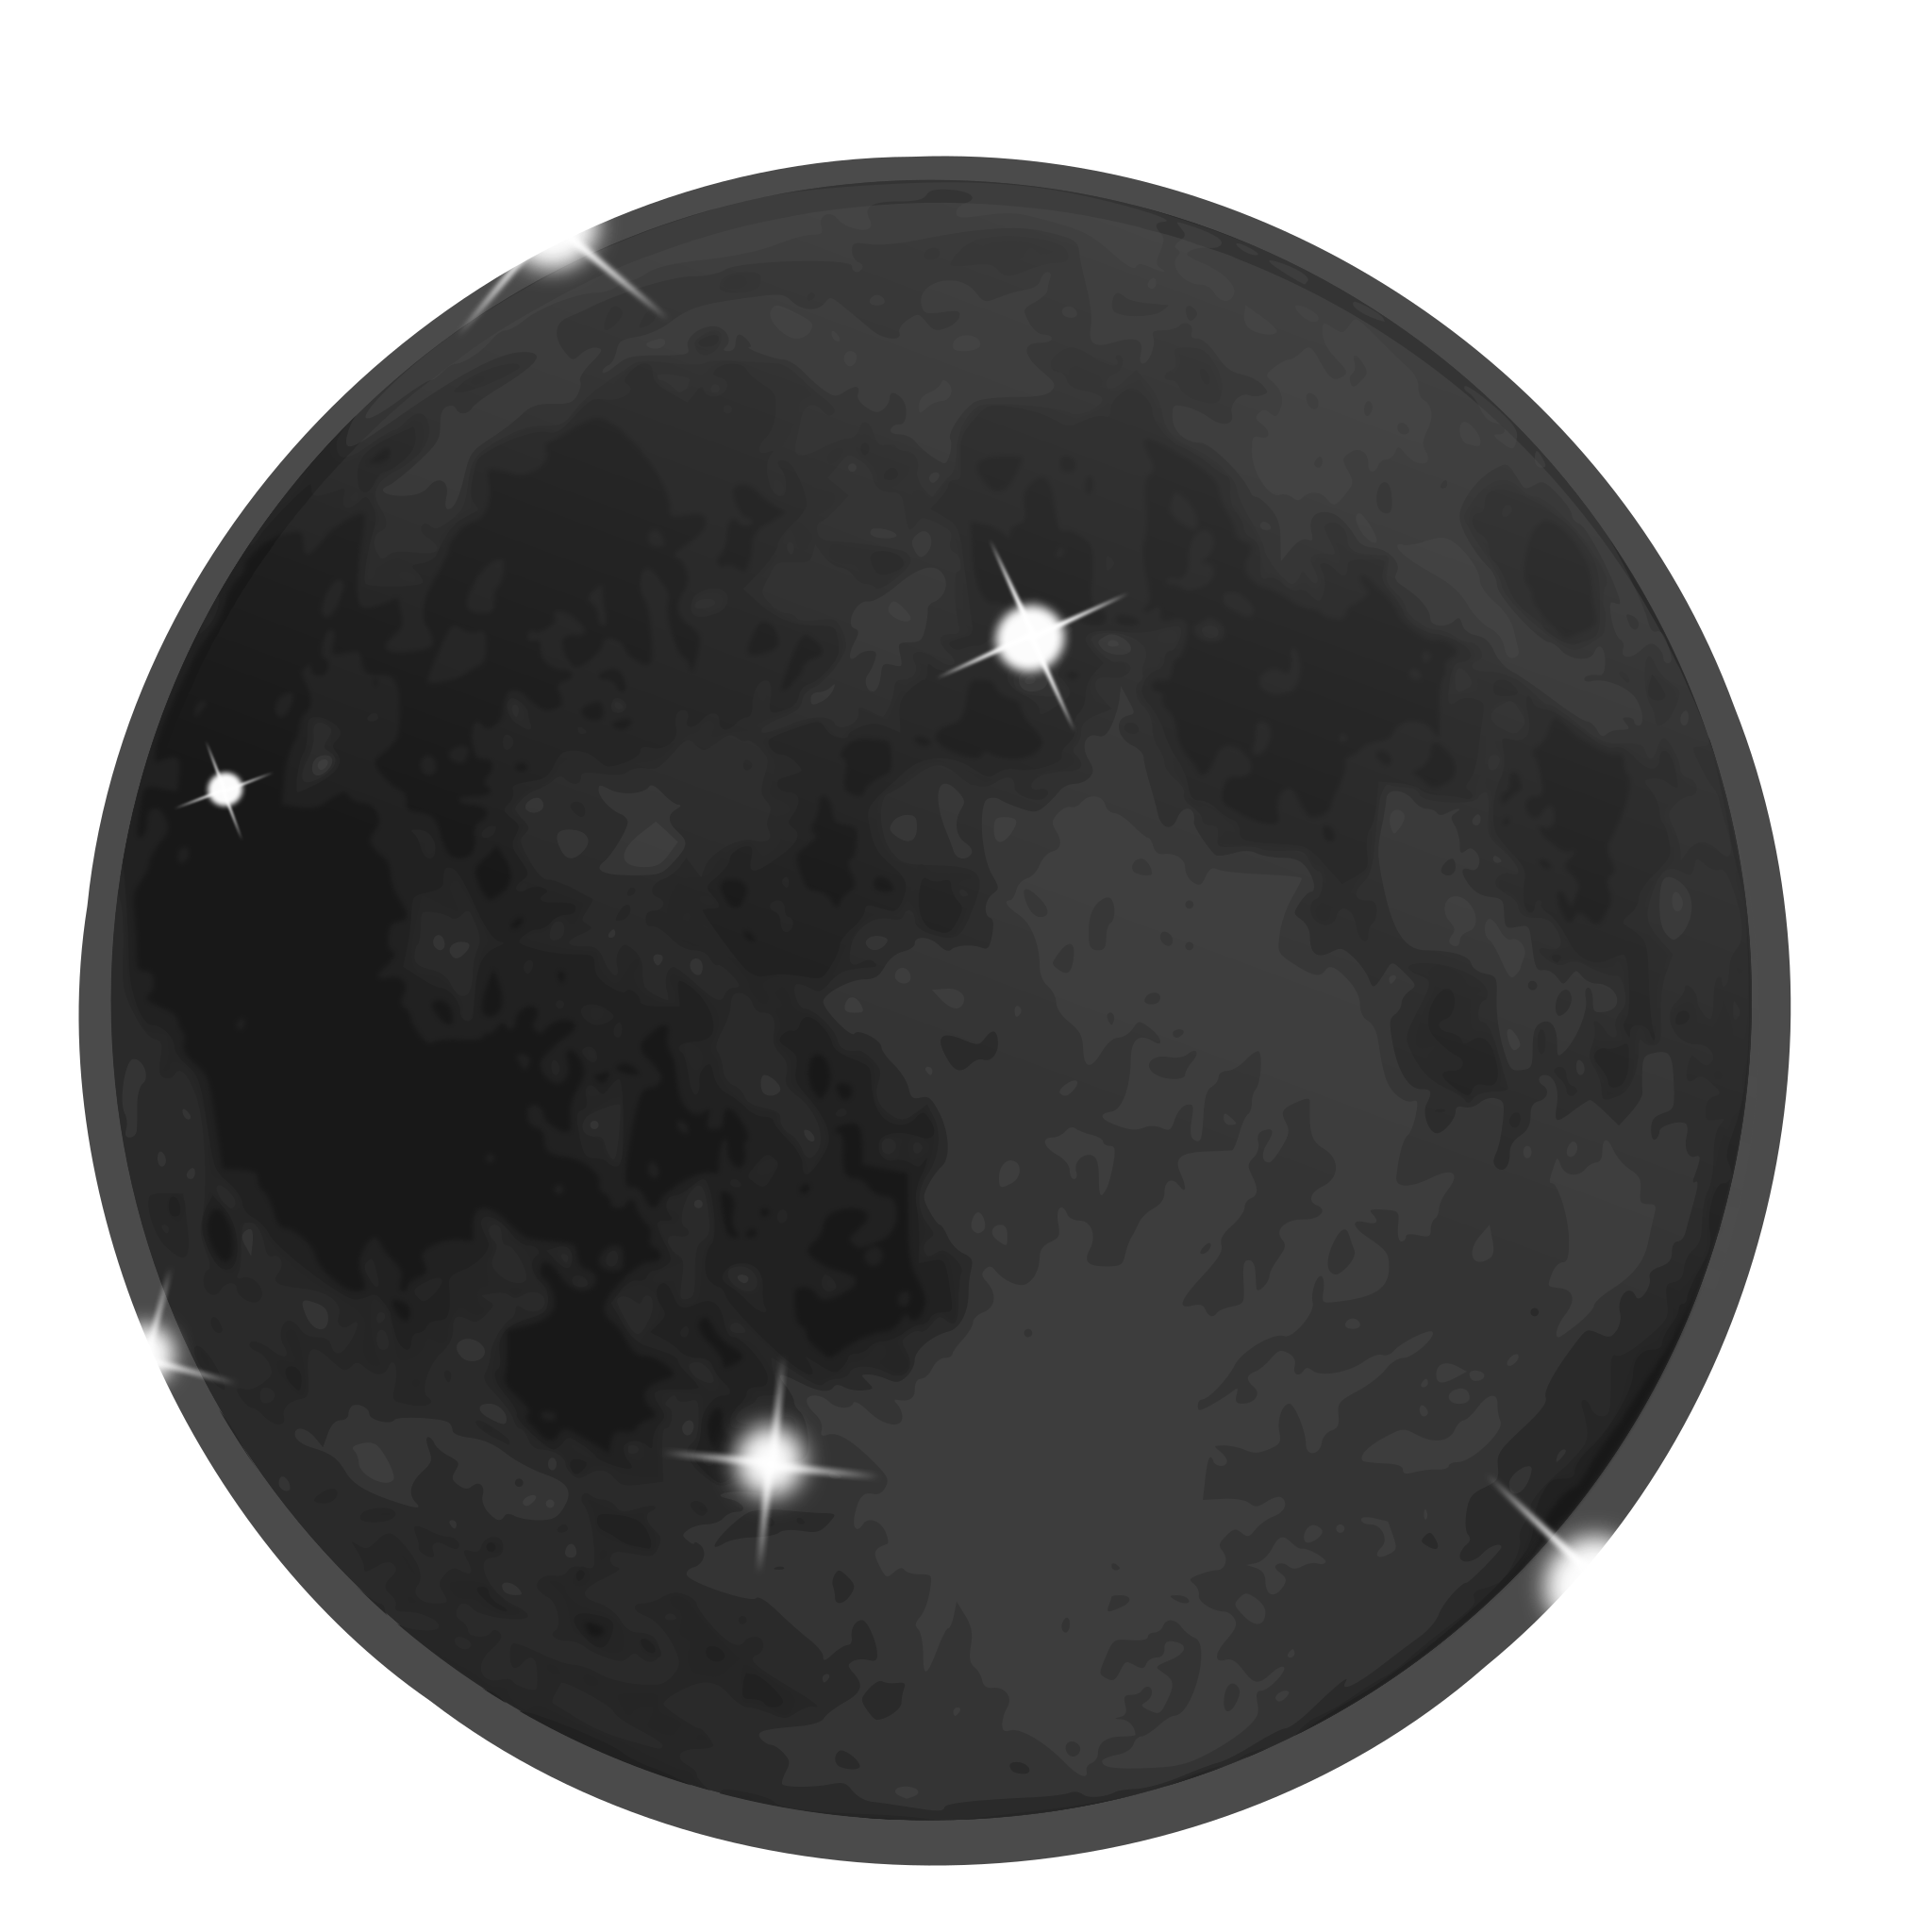 File:Weather icon - full moon.svg - Wikimedia Commons